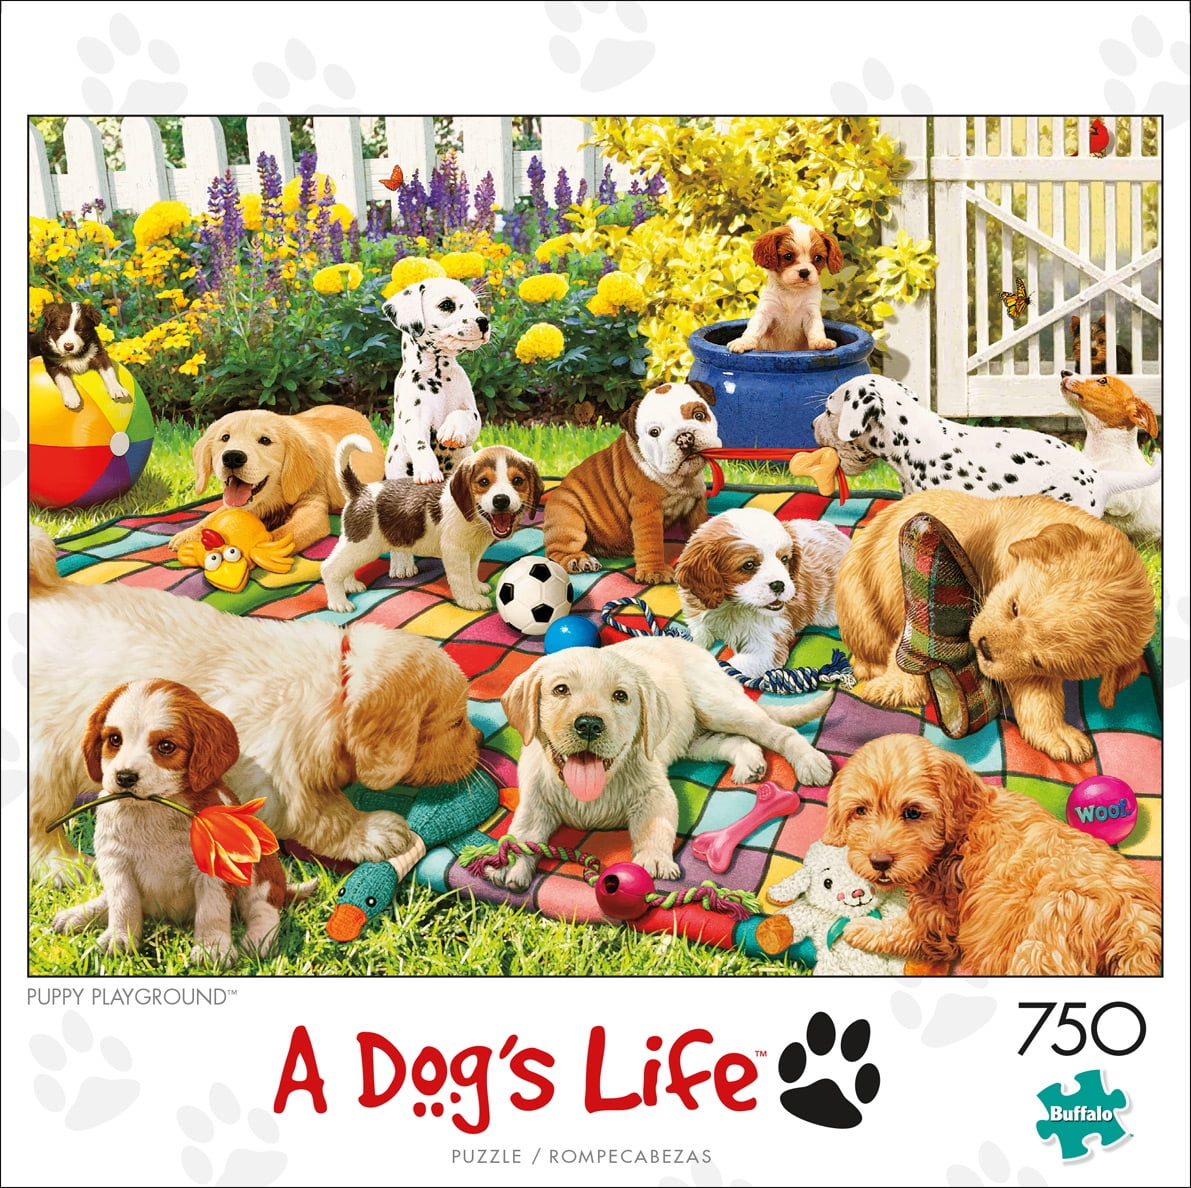 Jigsaw Puzzle 500 Pieces Puppy In Pool of Balls 14" X 11" Very Hard Small